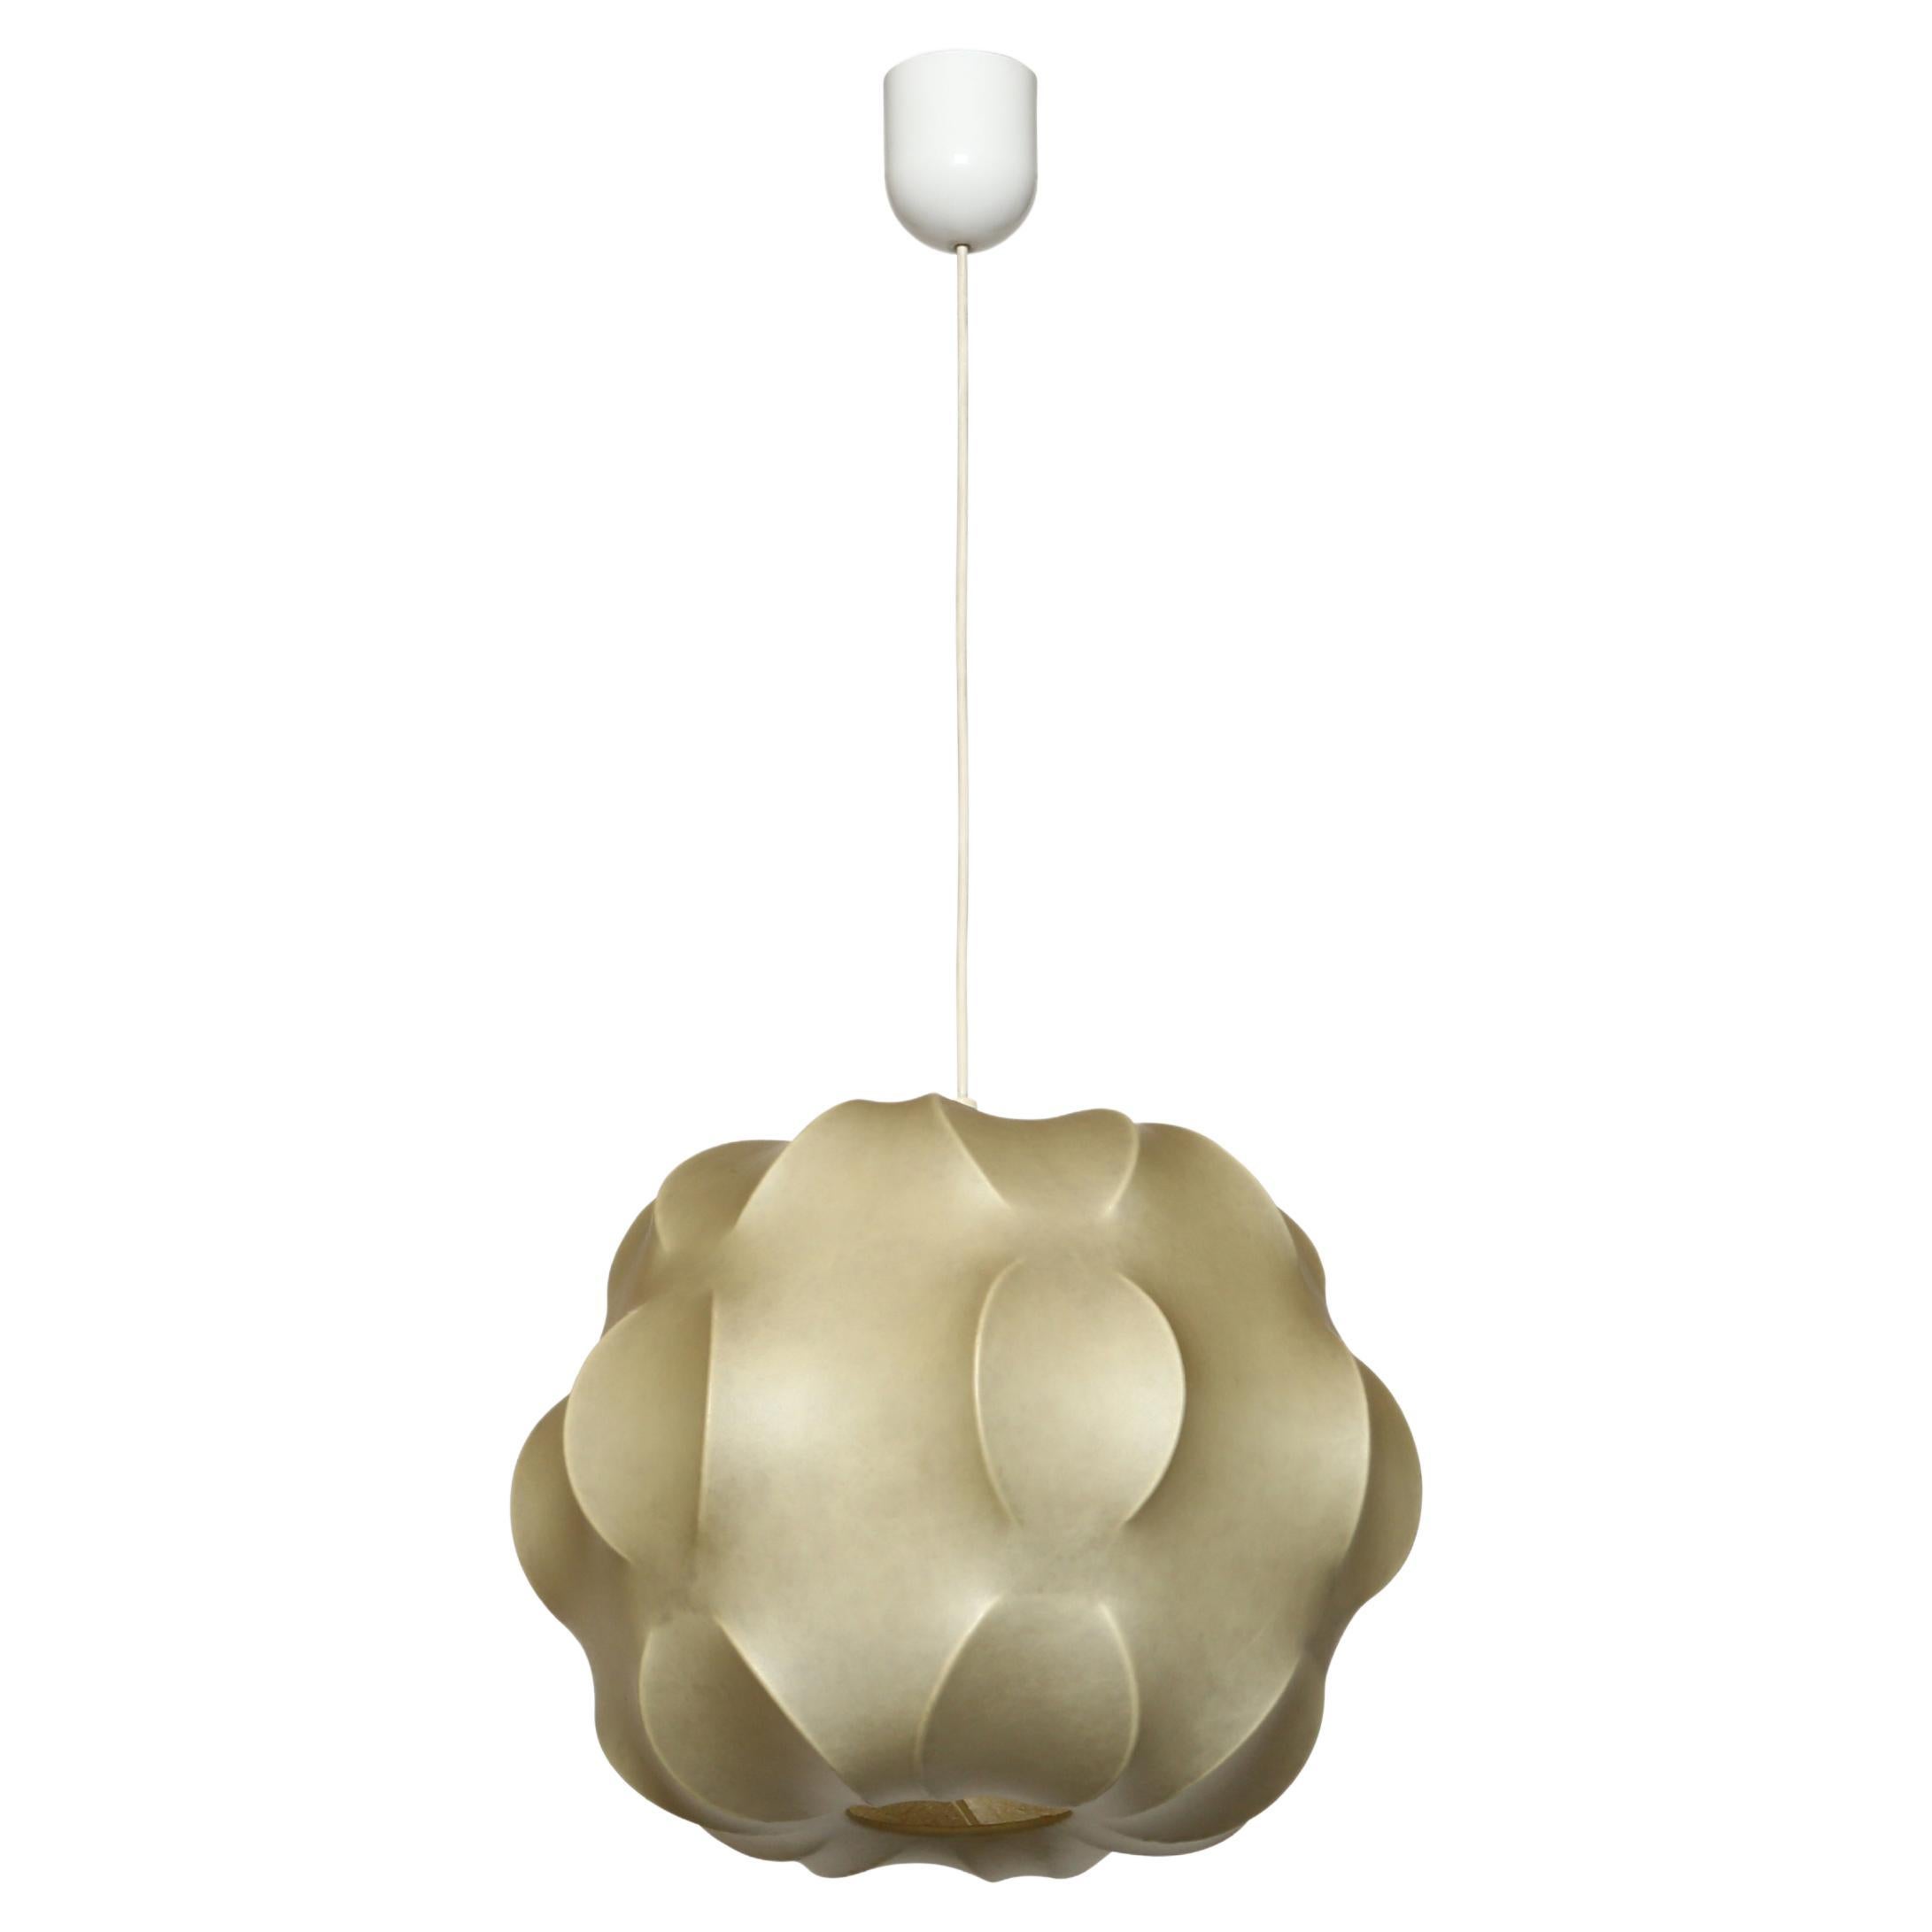 Cocoon Suspension Light for Flos, Sale at